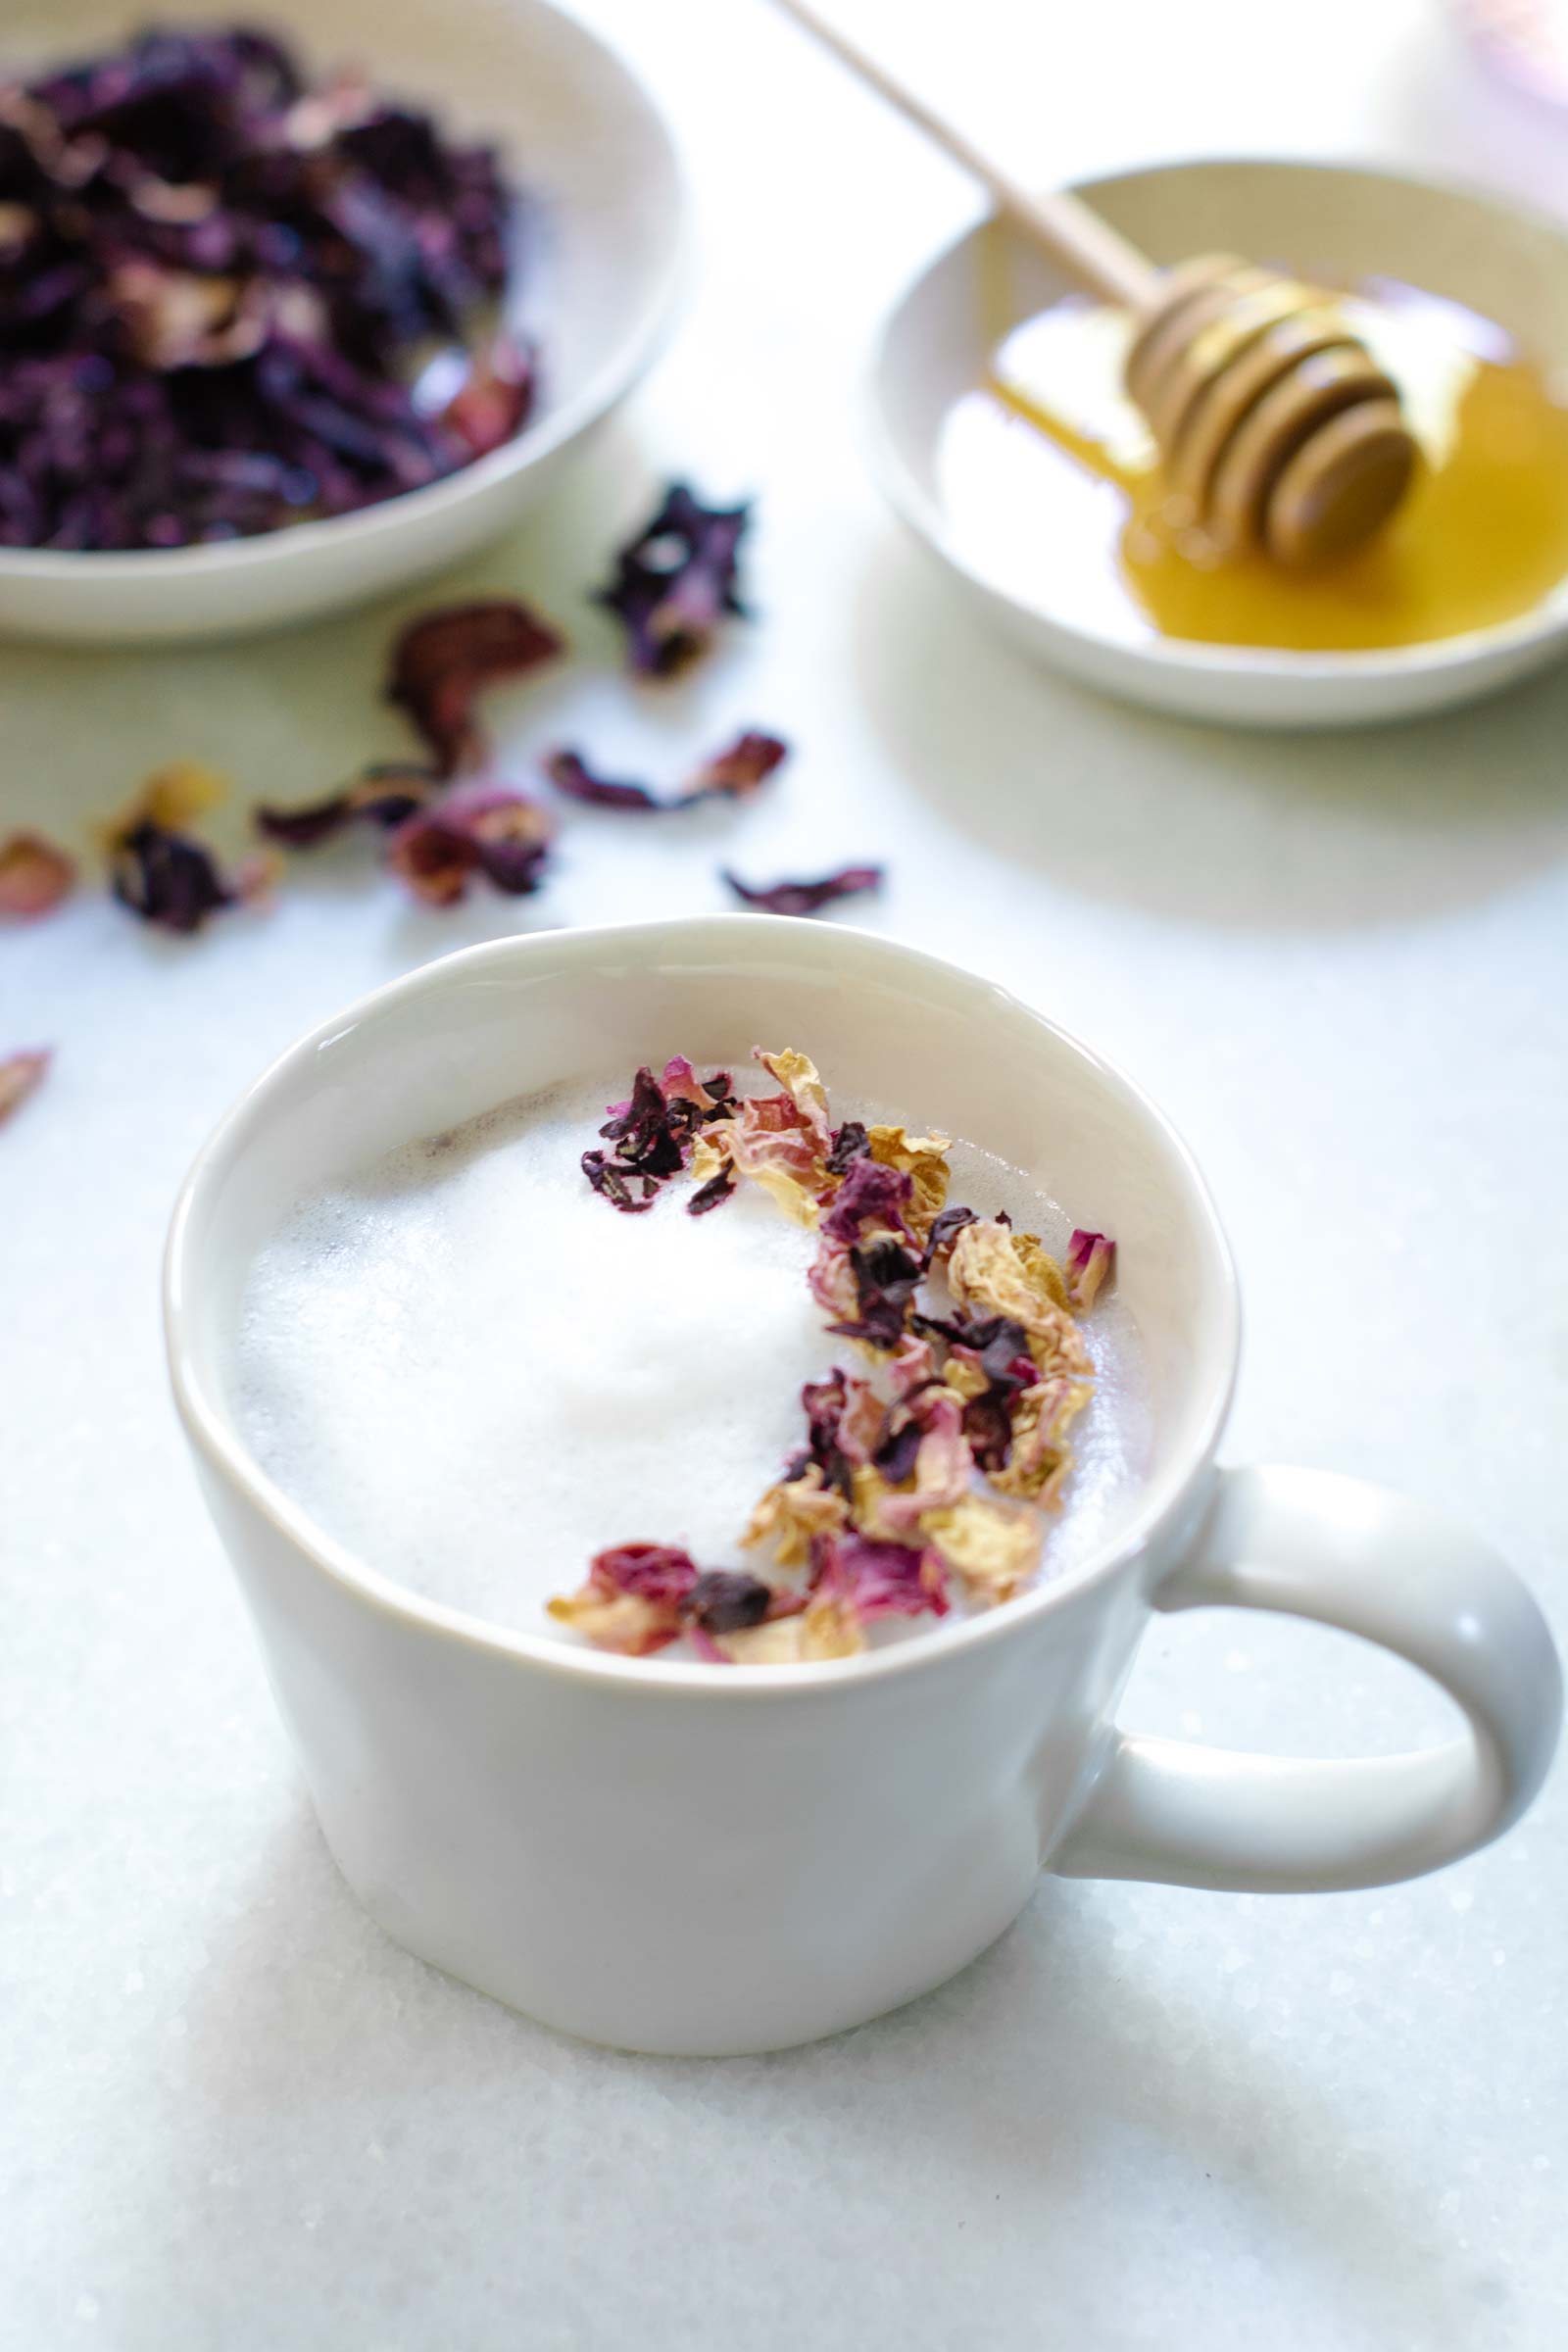 White mug of tea and steamed milk decorated with pink flowers - popular teas to enjoy with desserts